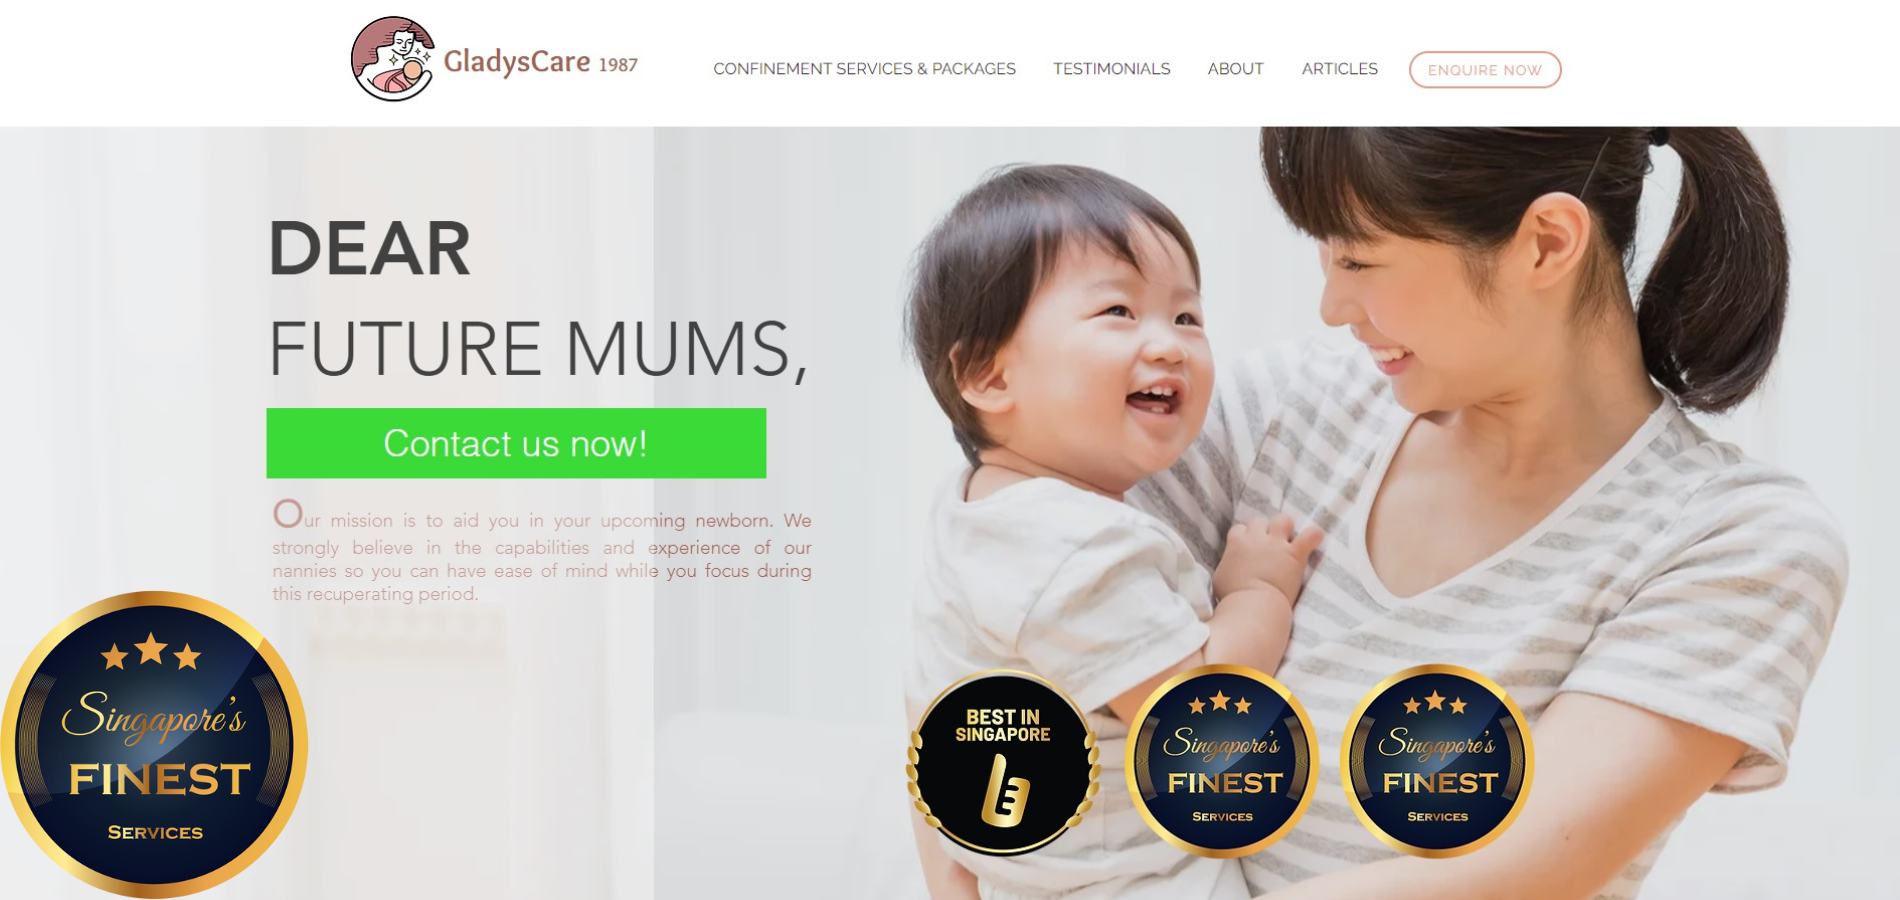 The Finest Confinement Nanny Services in Singapore